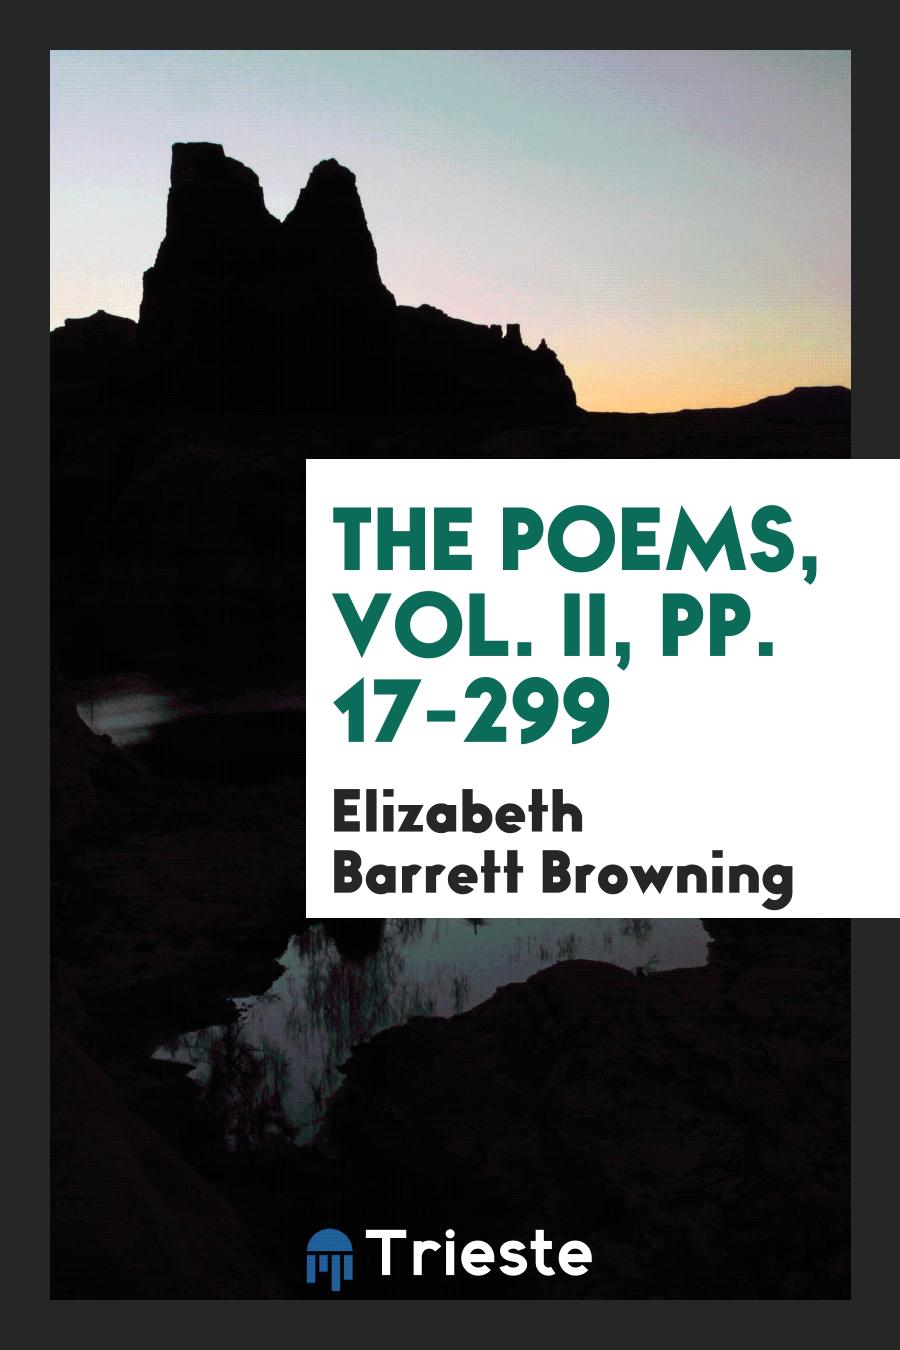 The Poems, Vol. II, pp. 17-299